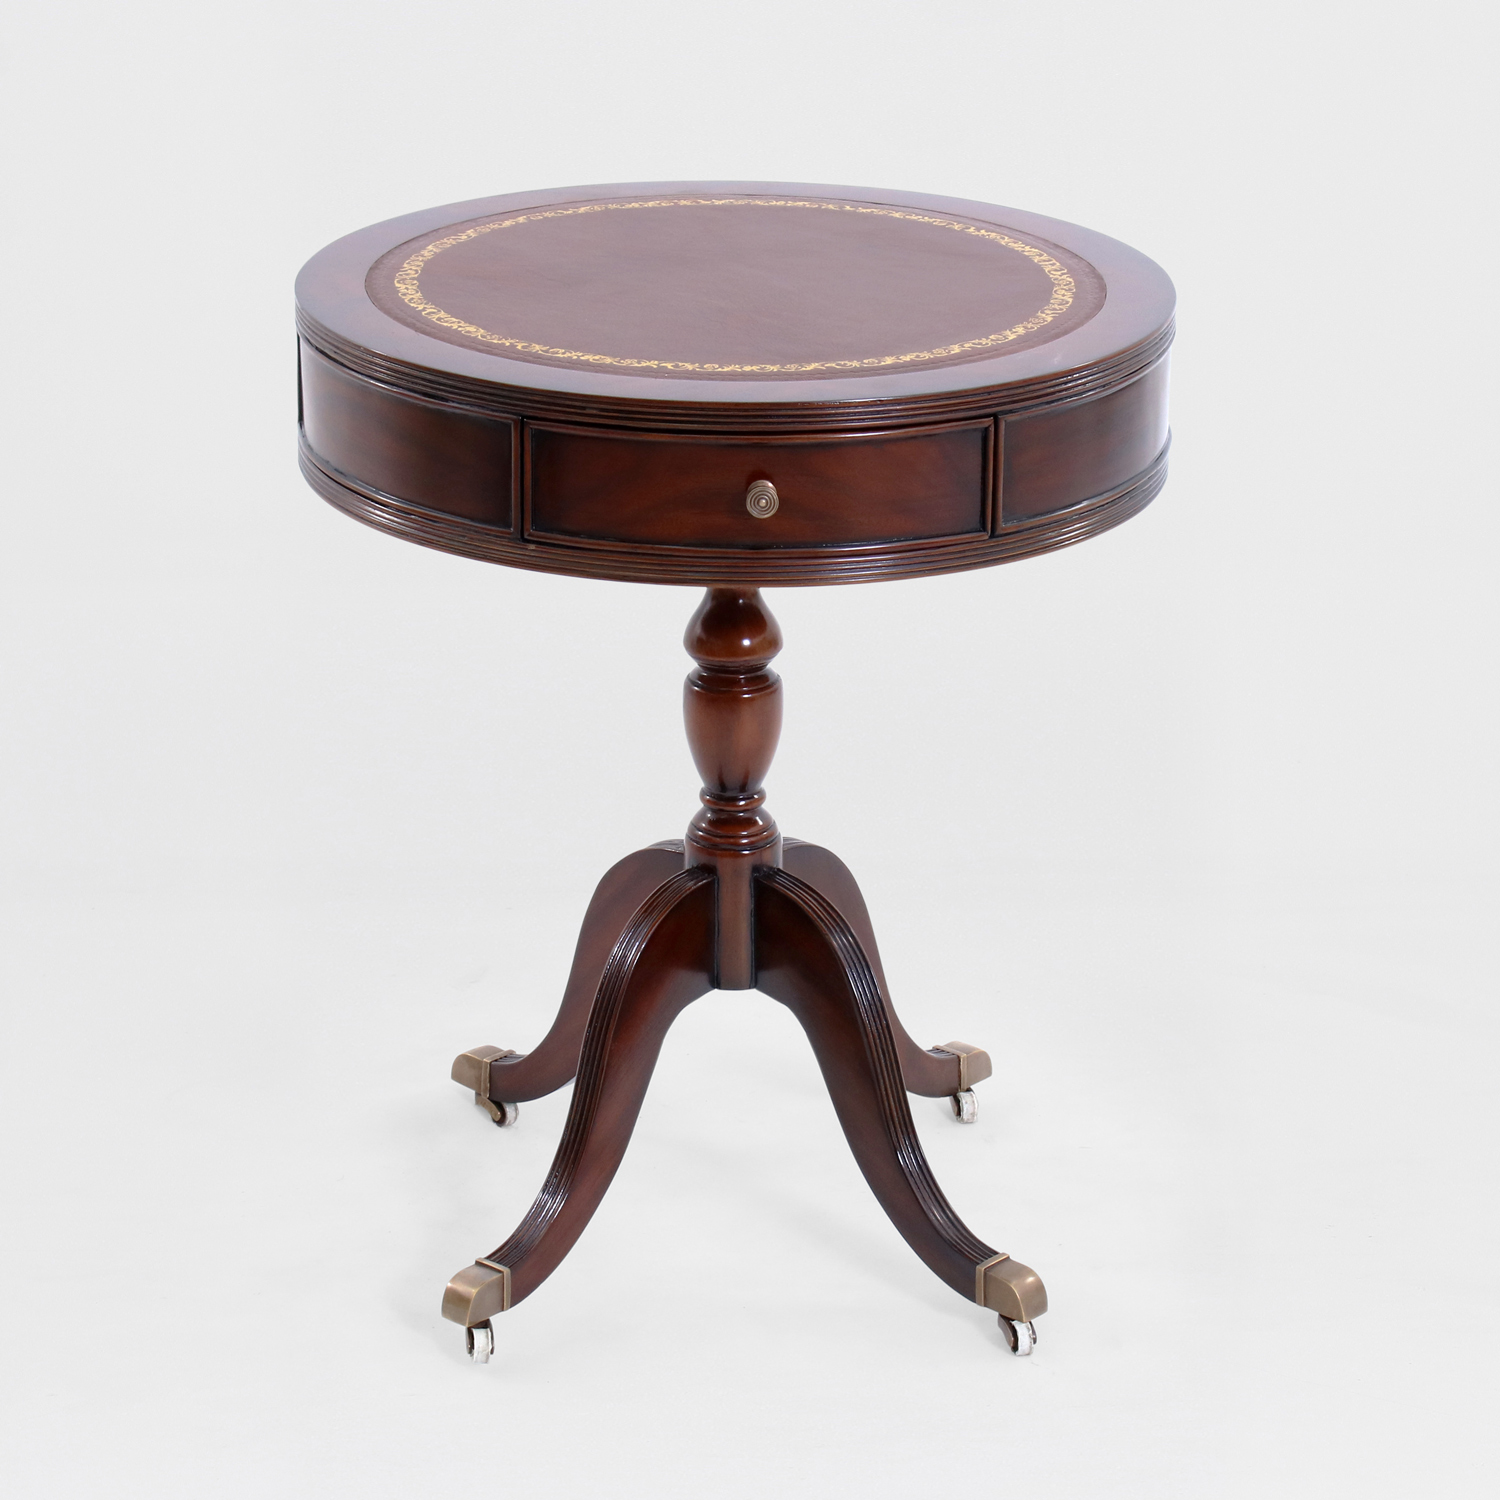 34870L---Drum-Table-Ron,-Leather-Top,-EM-+-ABRN-(1)